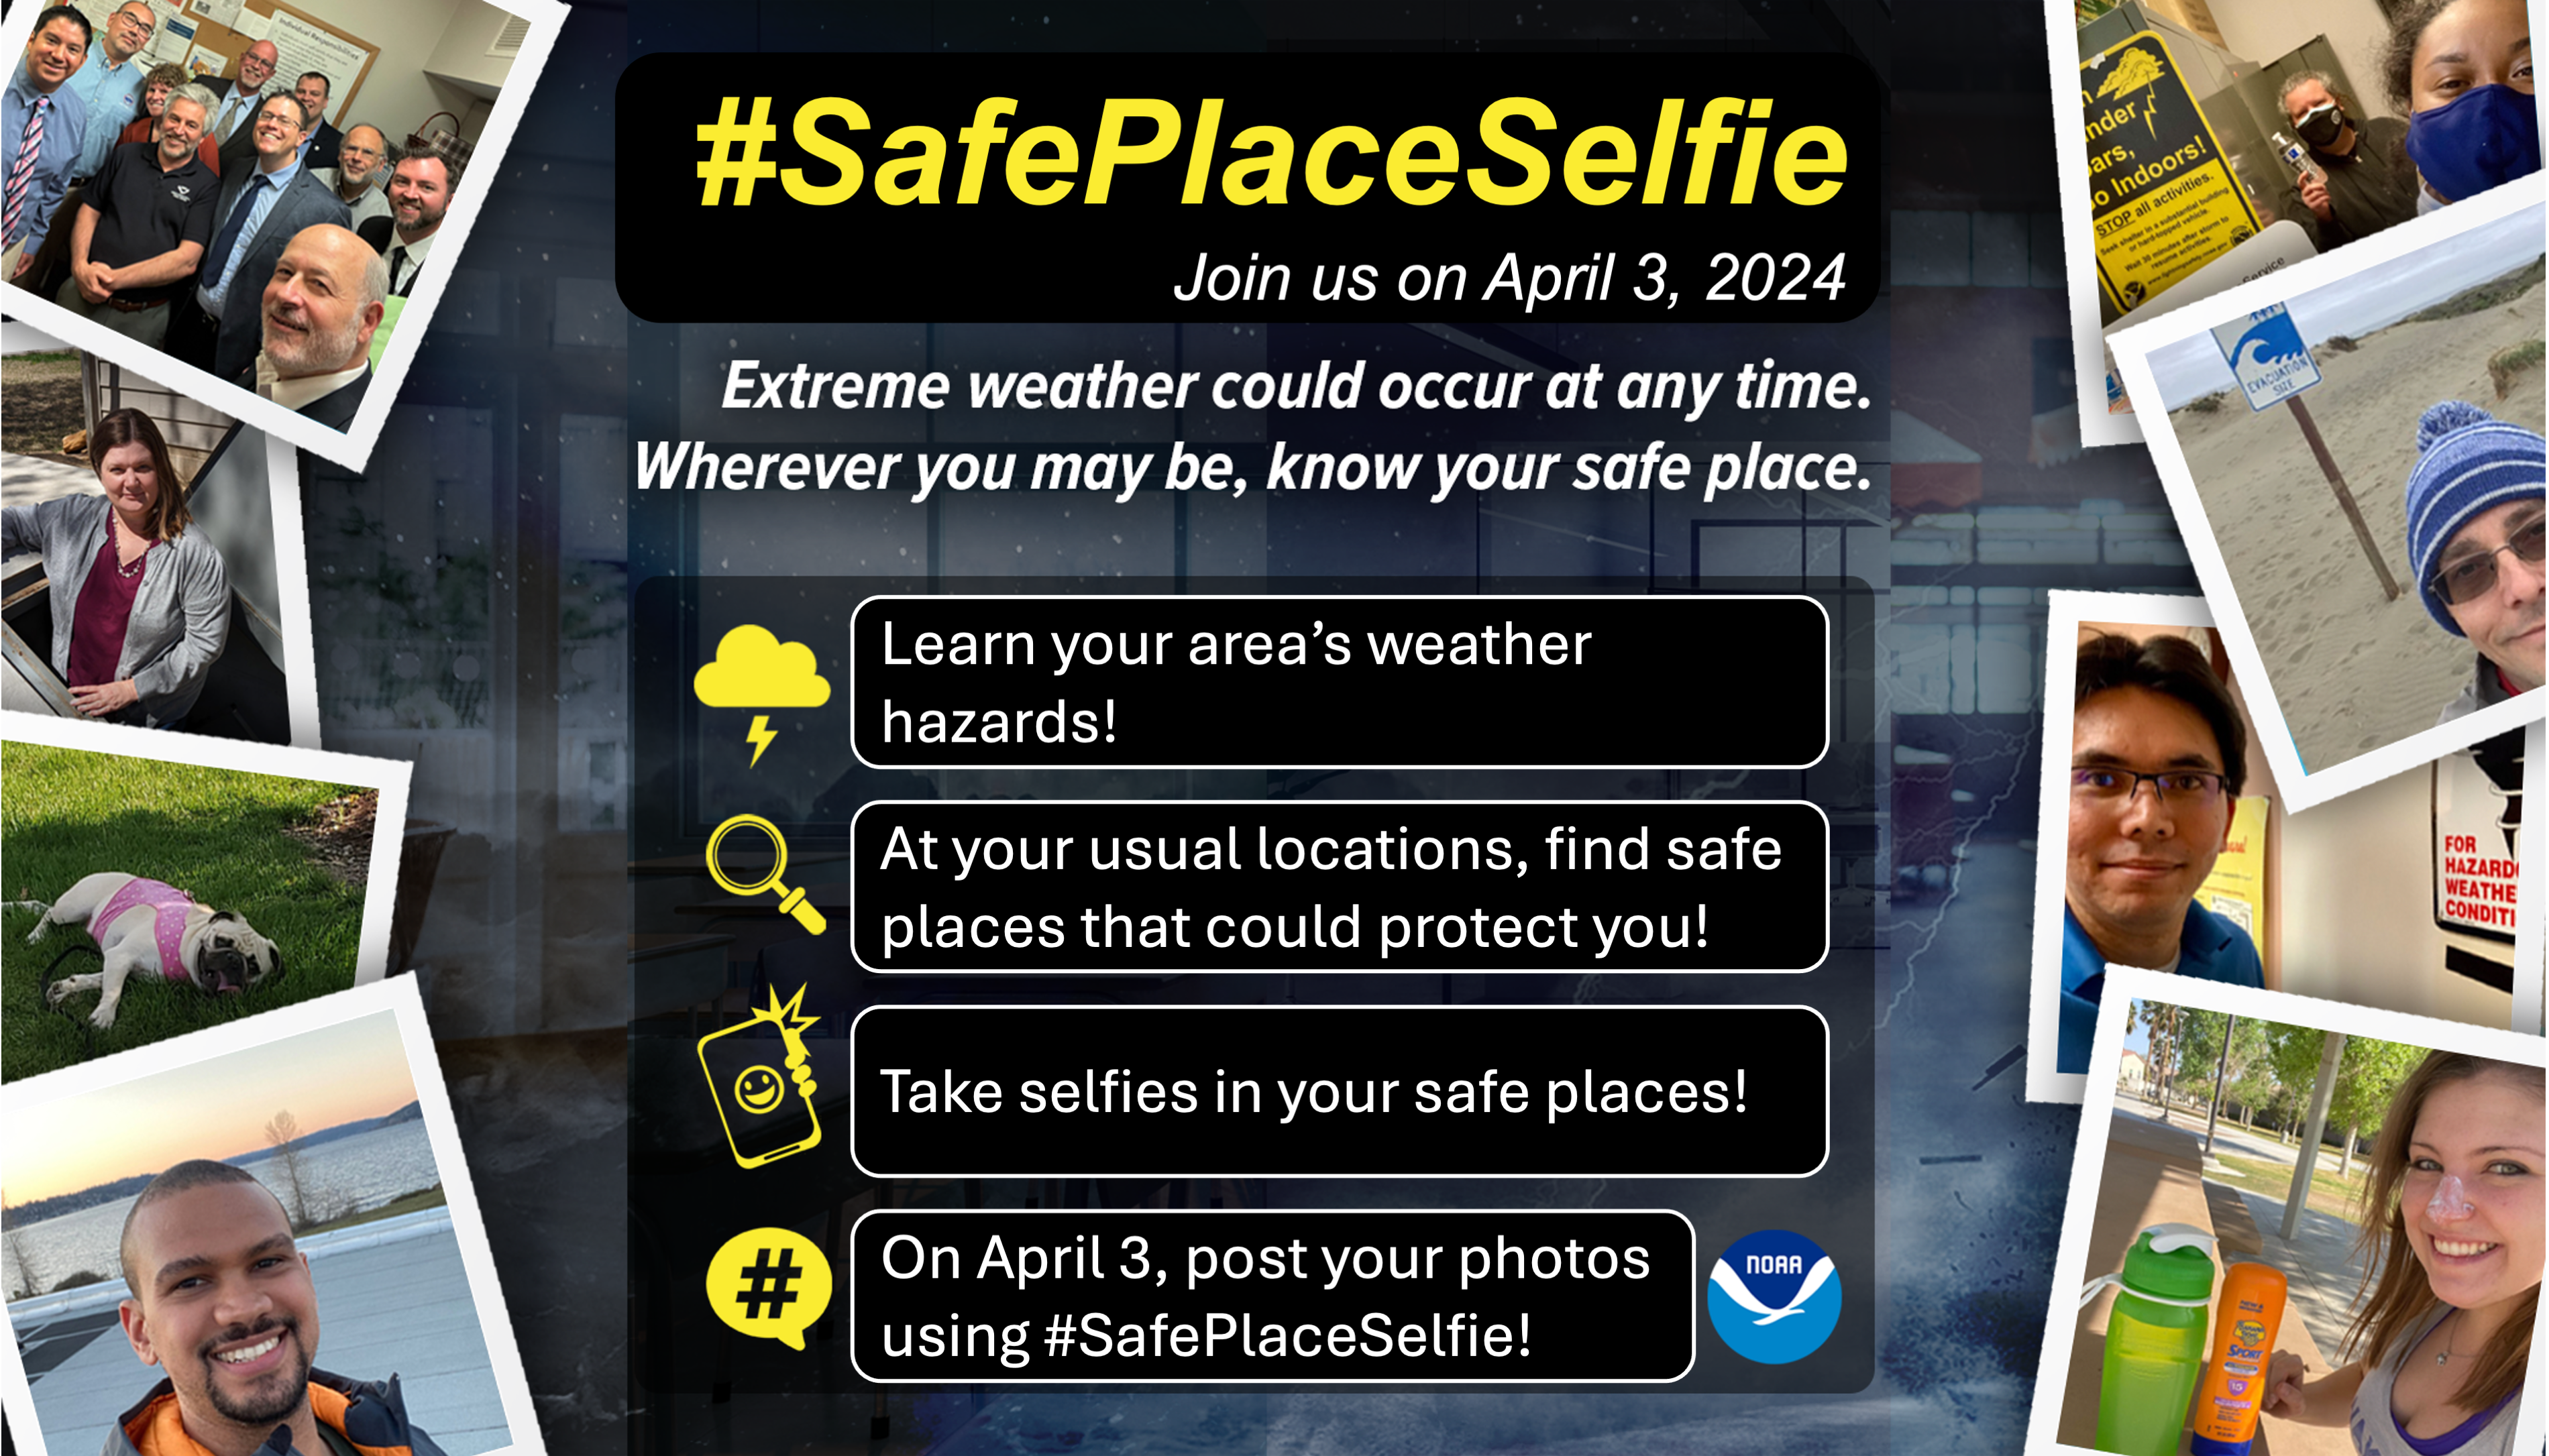 2024 Safe Place Selfie promo. Event will be April 3, 2024.